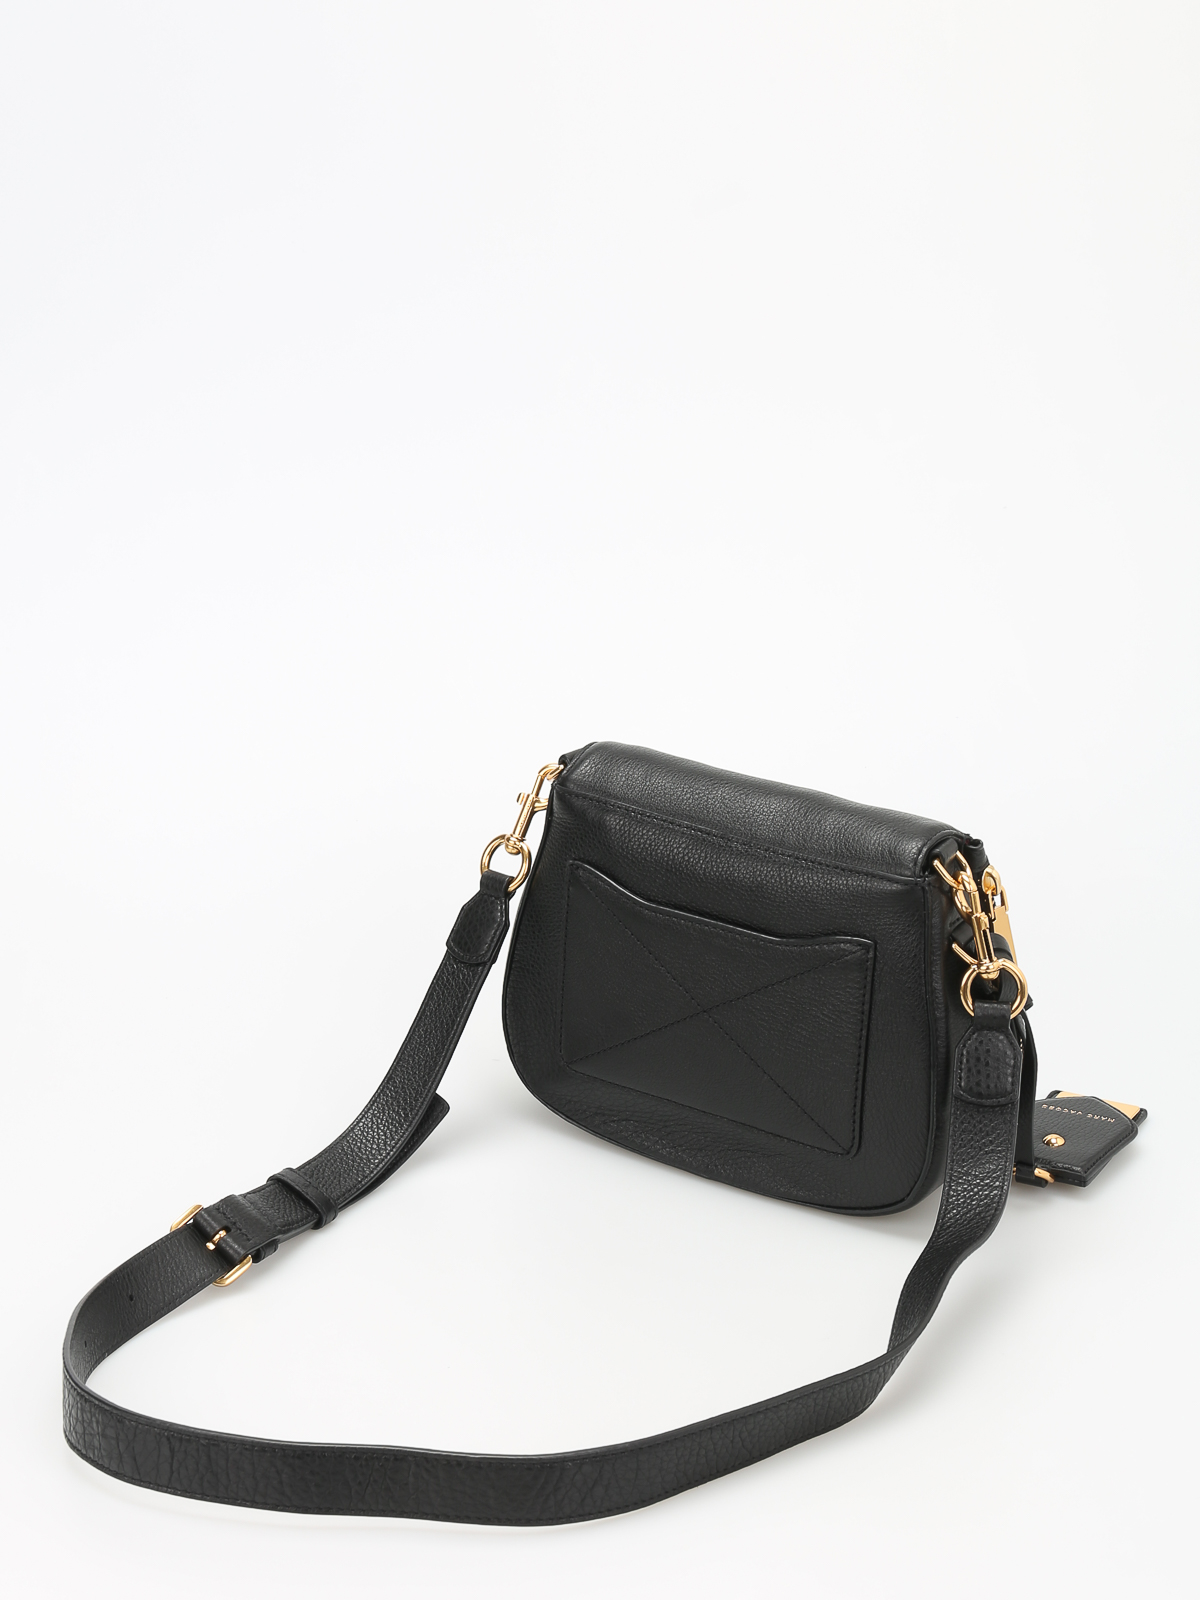 MARC JACOBS BESACE BANDOULIERE BANDOULIERE BLACK LEATHER HAND BAG